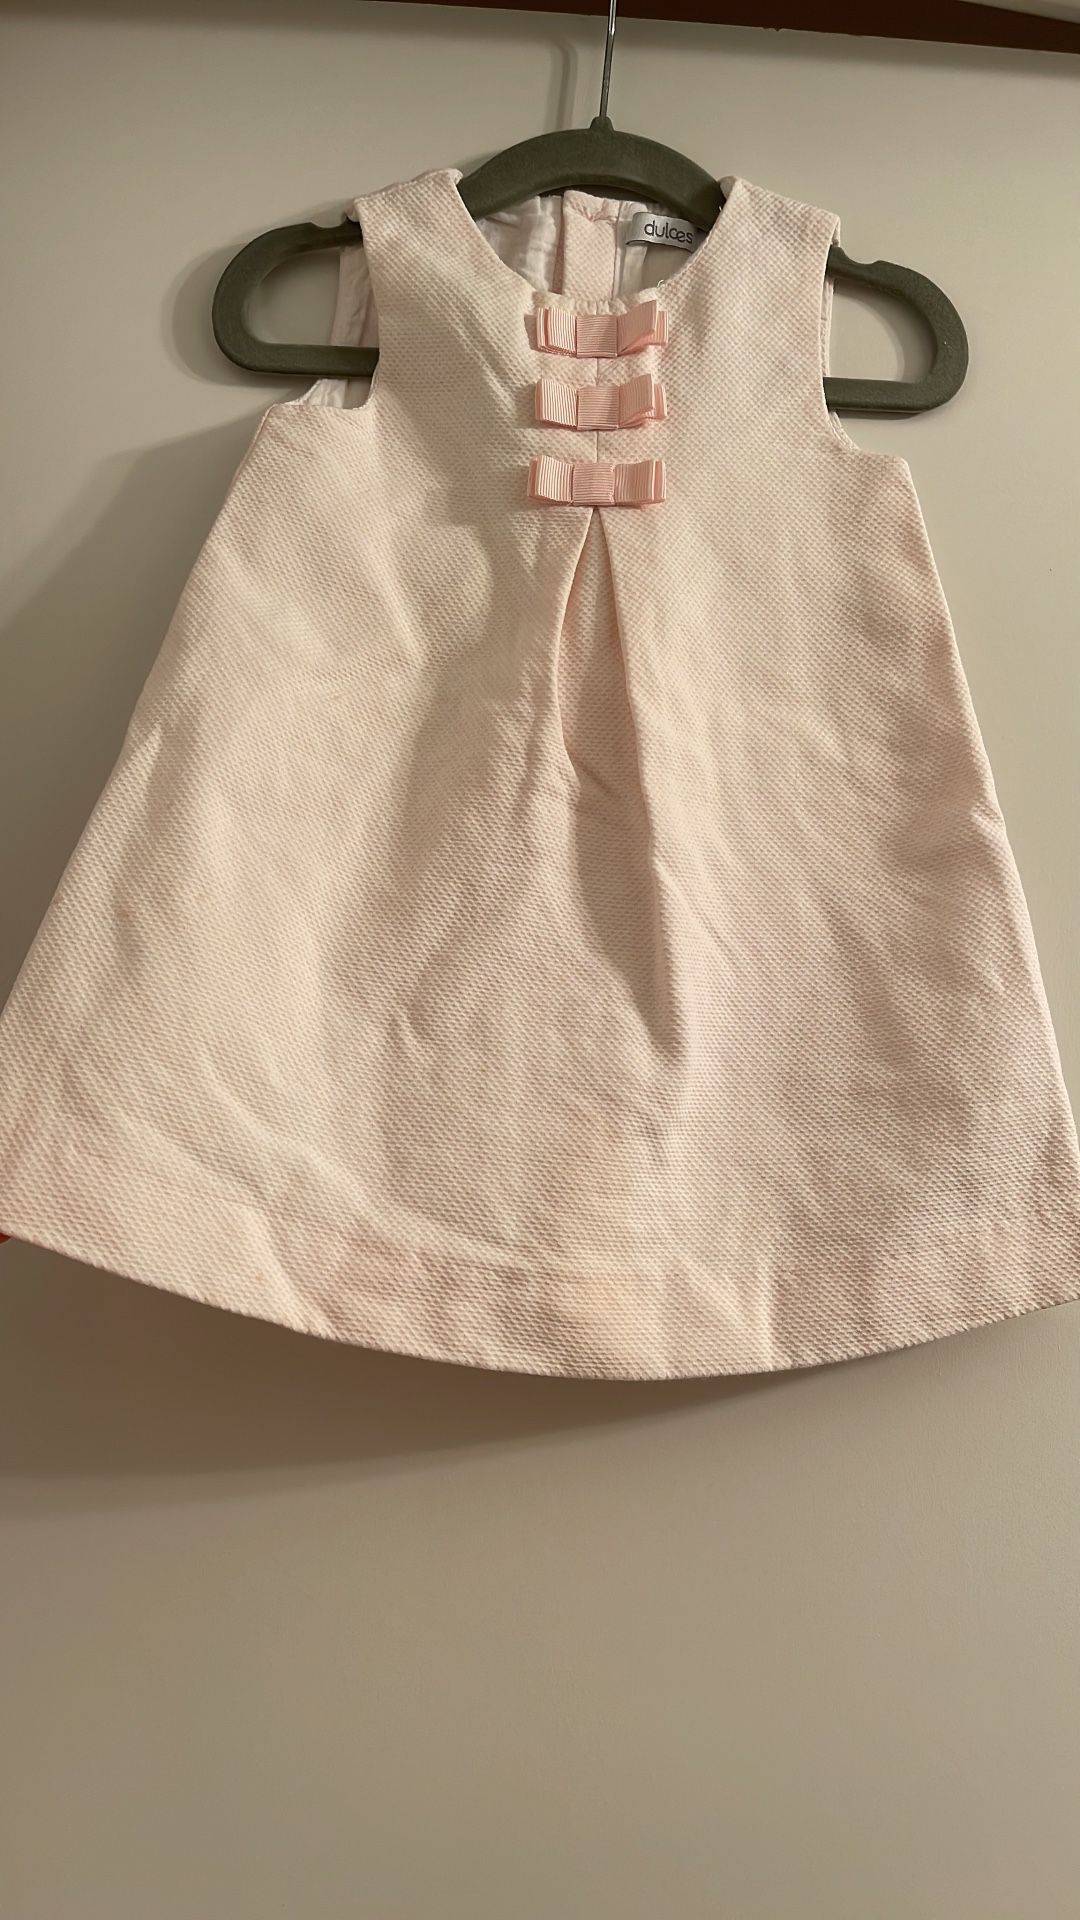 DULCES similar to Janie and Jack Toddler Pink Dress, 2T